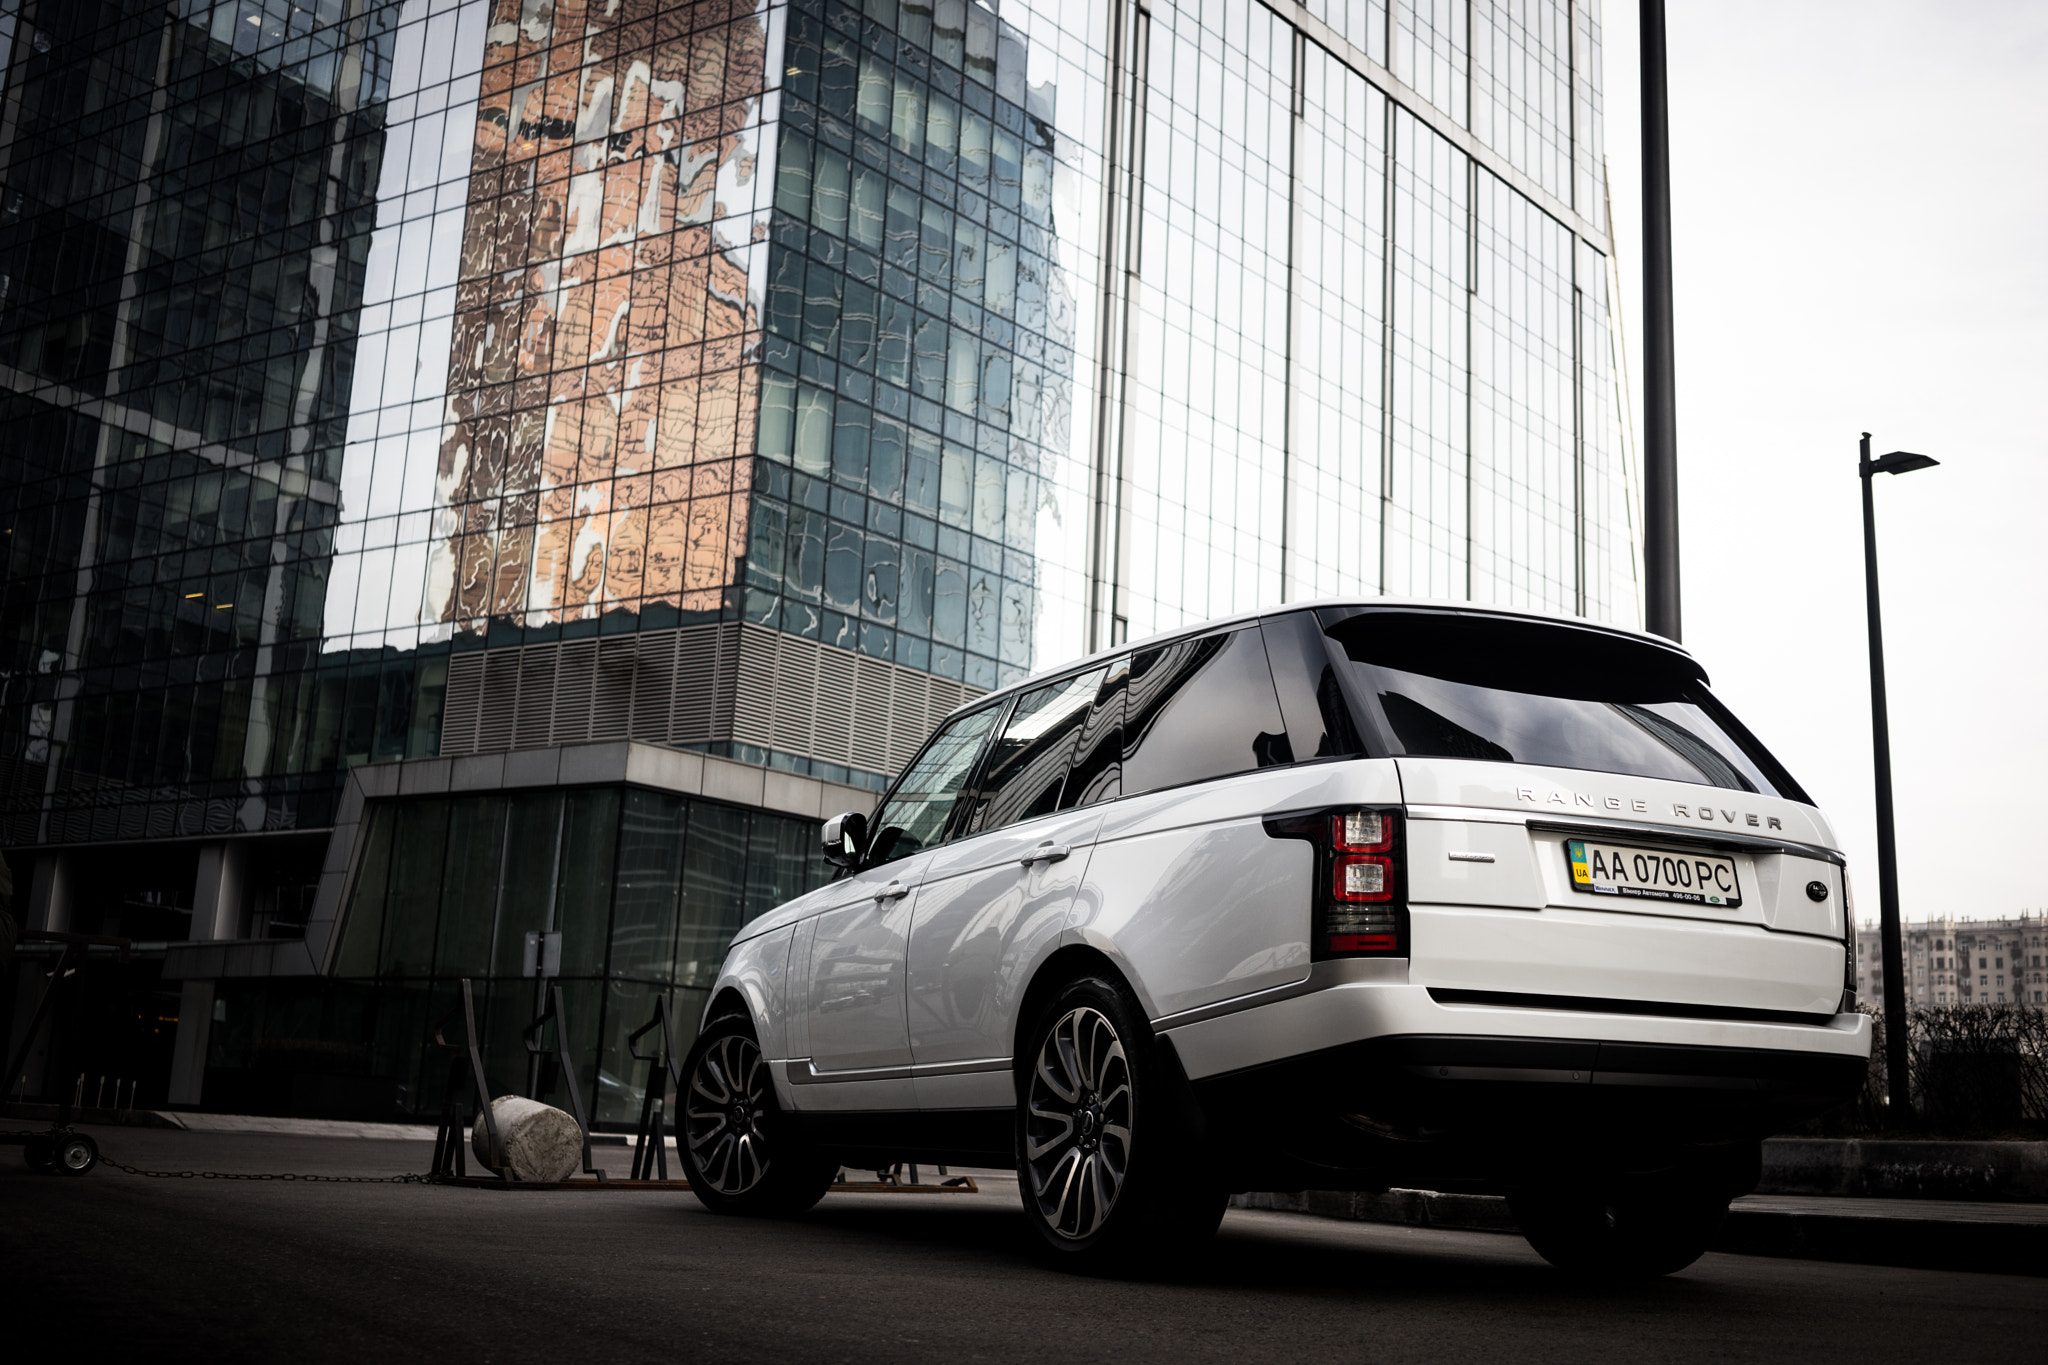 Sony a7 II sample photo. Range rover at the city photography